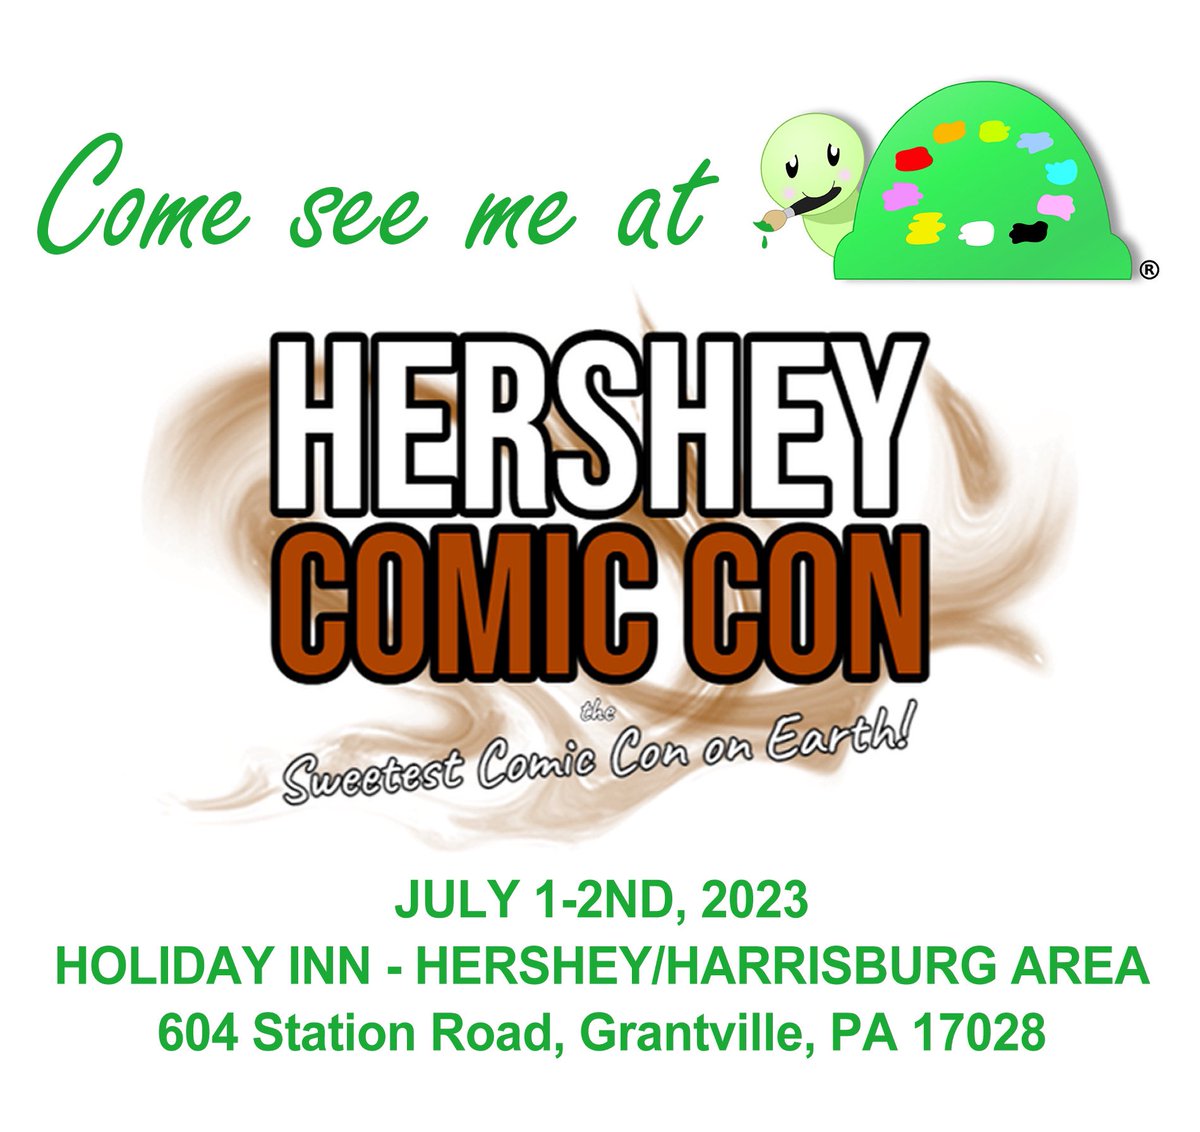 That’s right! This year I’ll be selling my artwork at Hershey Comic Con, this July 1st - 2nd! Hope to see you all there❣️

#comiccon #hersheys #hersheycomiccon #comicbooks #fanart #artist #illustration #Pokemon #manga #anime #disney #artistalley #artistalleytable #cosplay